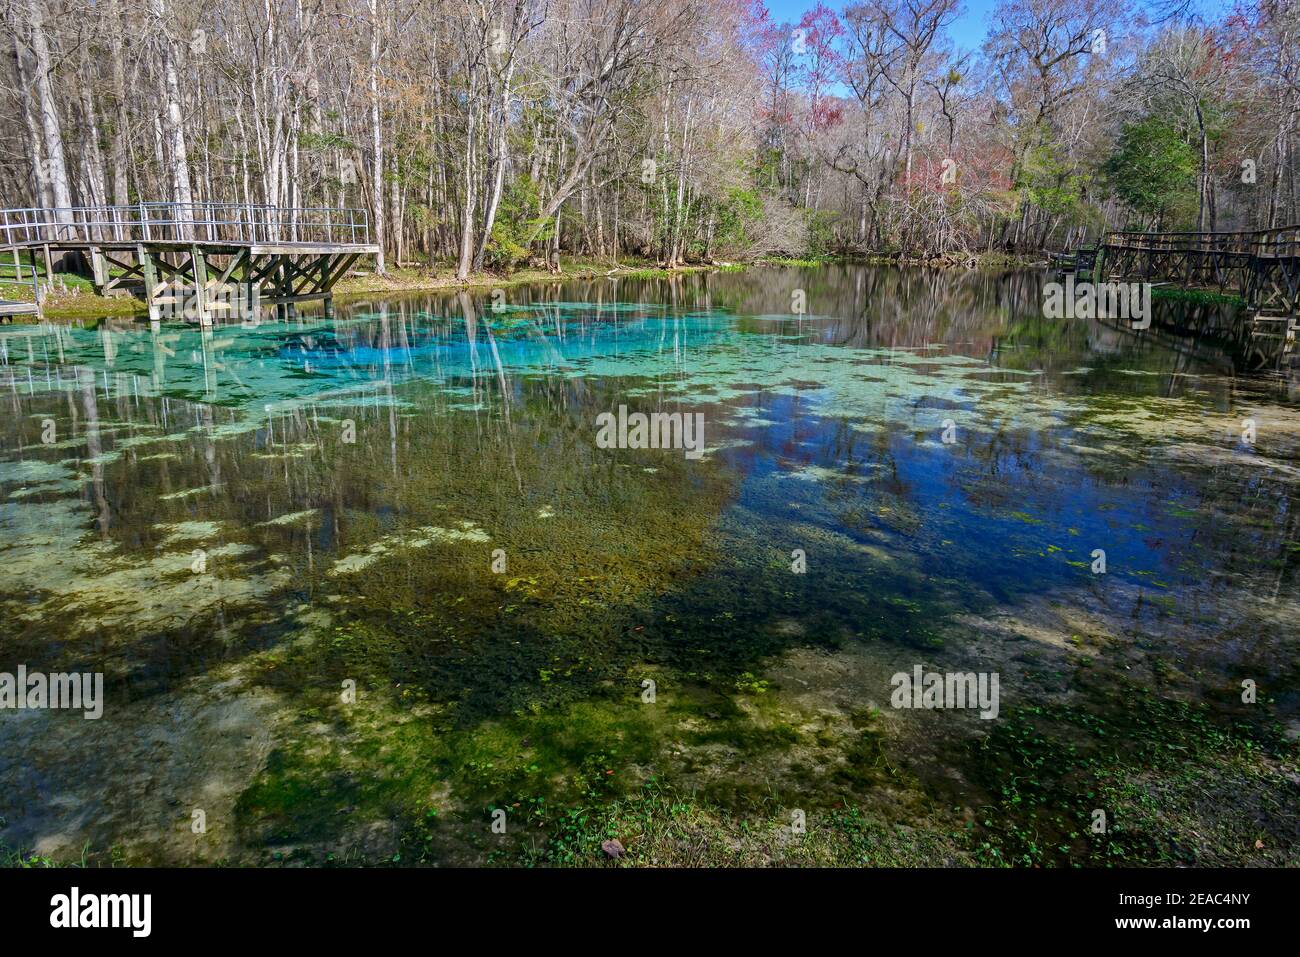 Spring pot Blue Spring with crystal clear water, High Springs, Gilchrist County, Florida, USA, United States Stock Photo